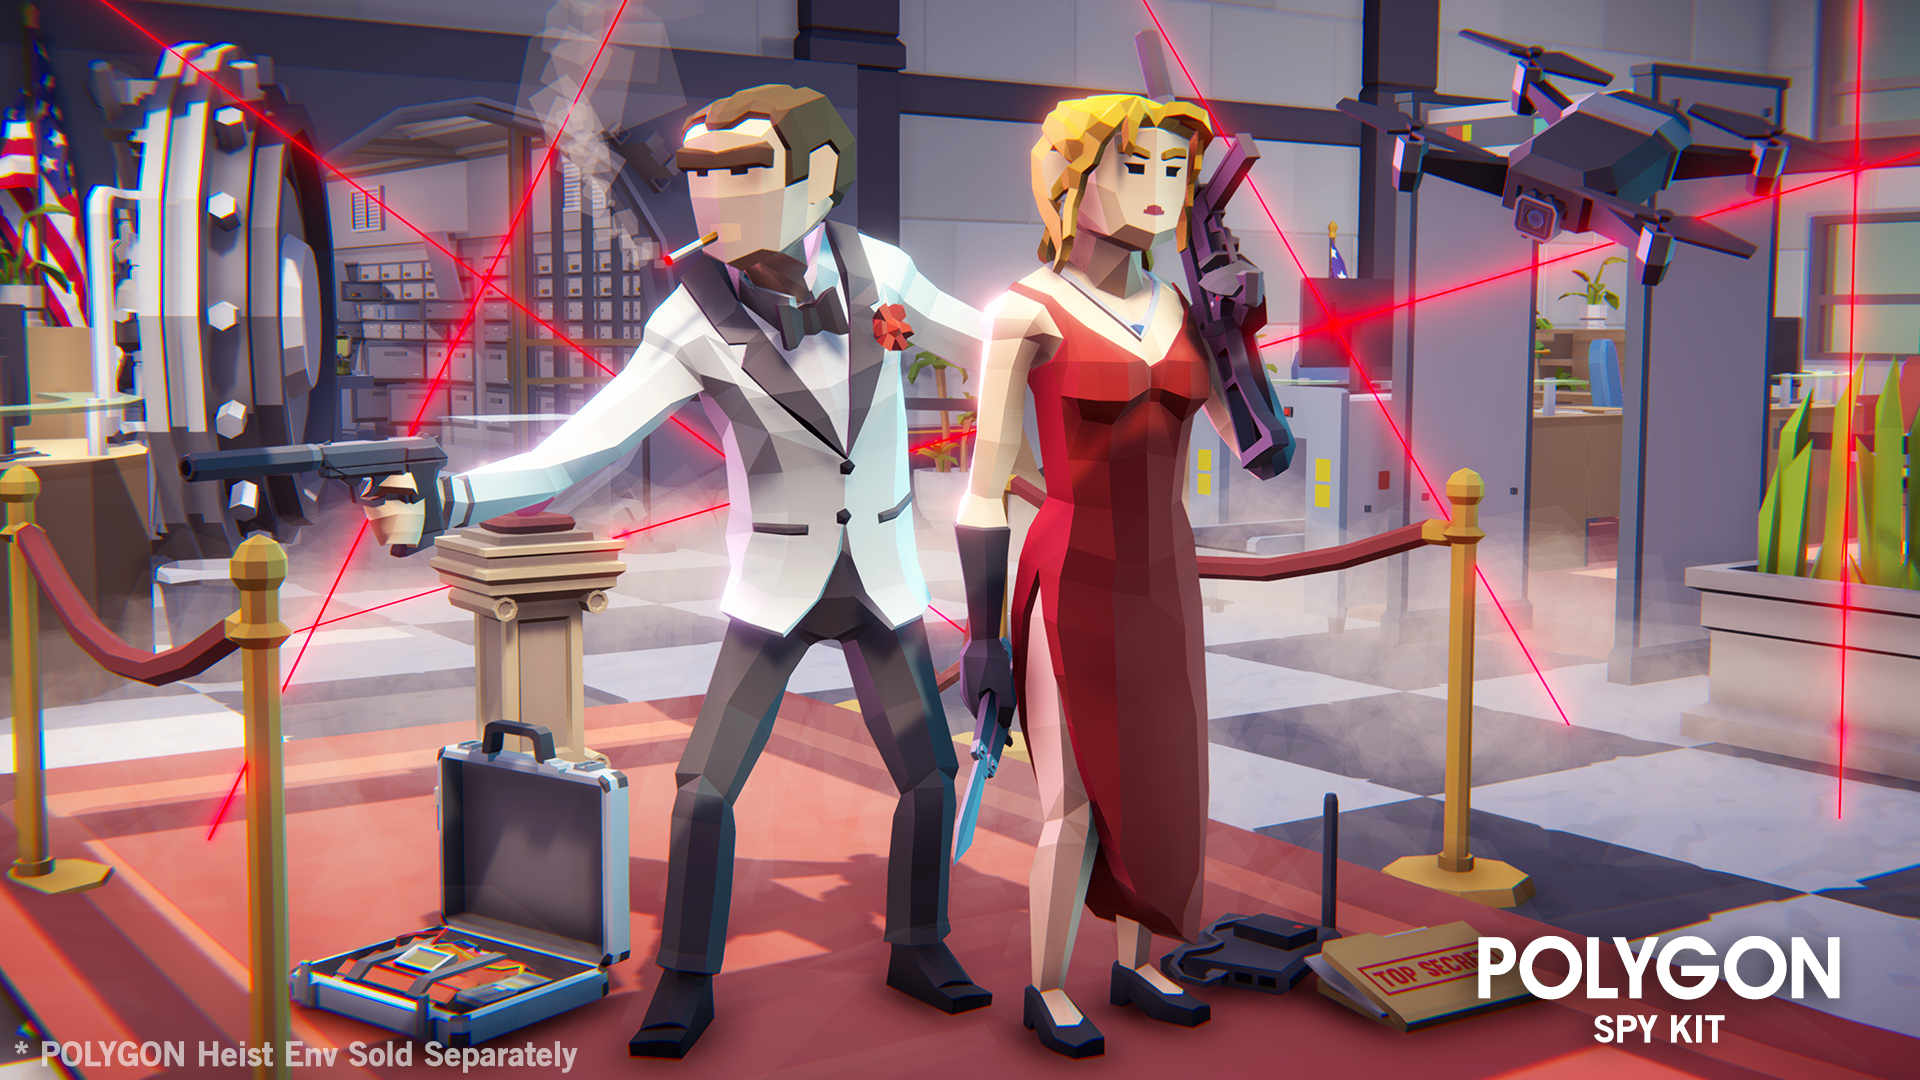 POLYGON - Spy Kit - Synty Studios - Unity and Unreal 3D low poly assets for game development